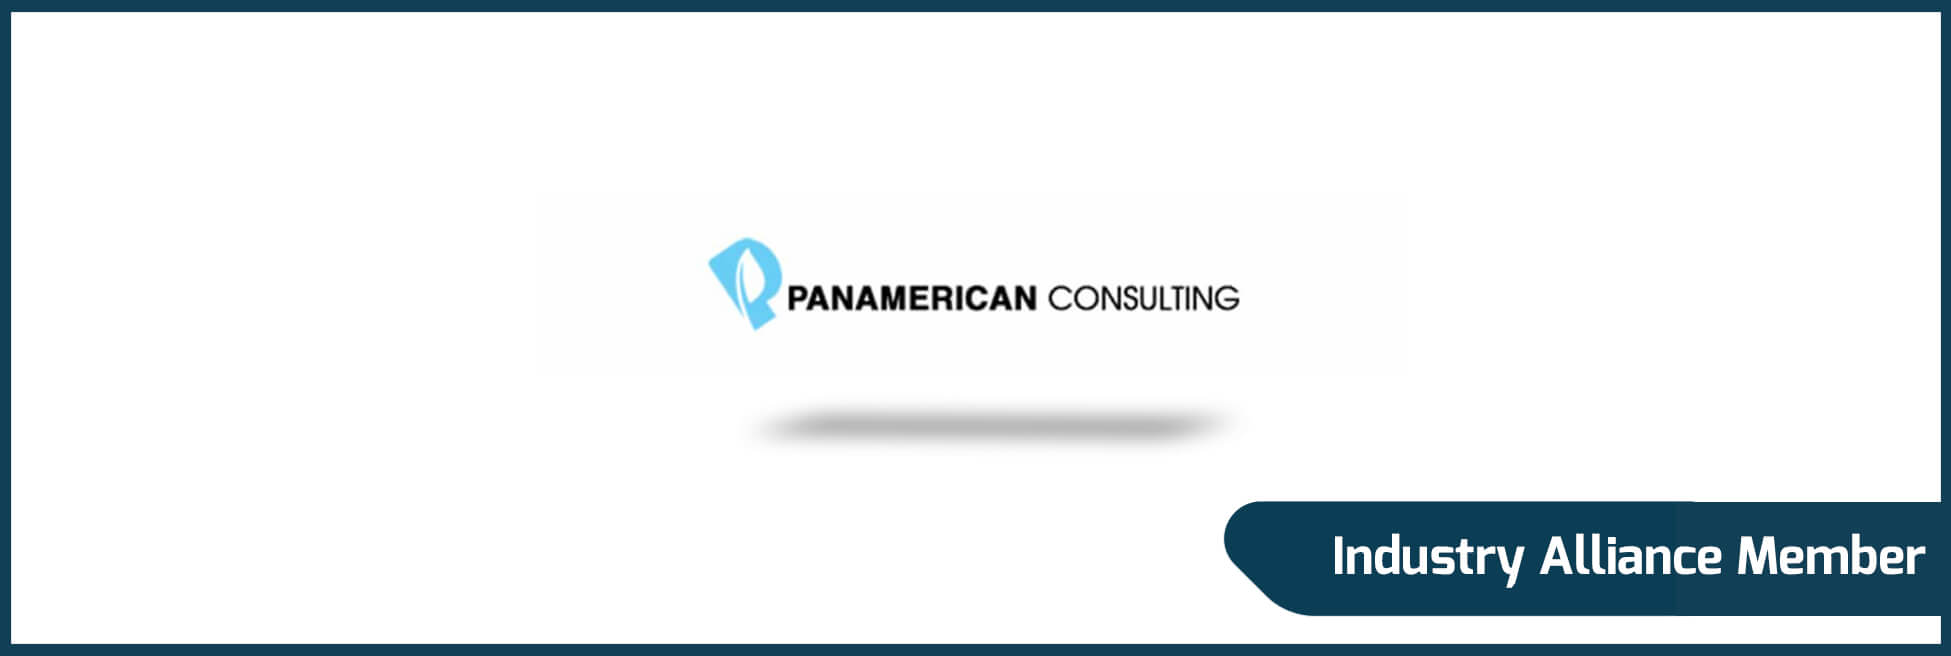 Panamerican Consulting